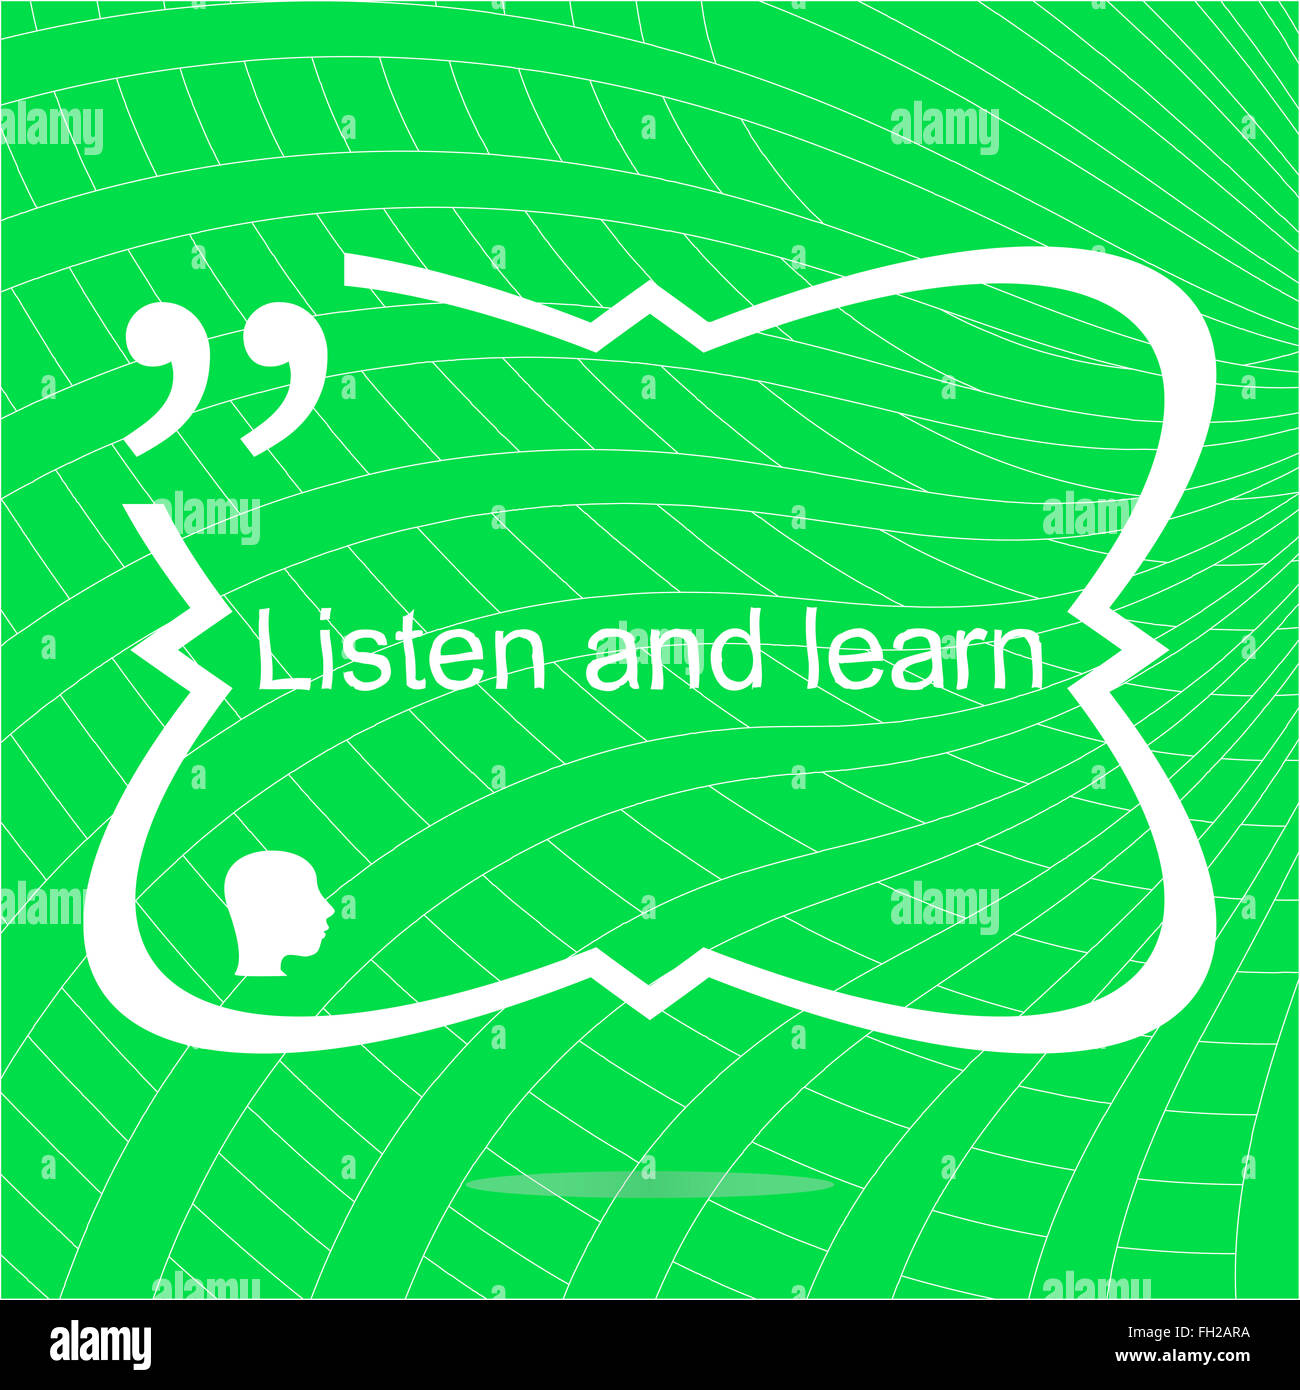 Listen and learn. Inspirational motivational quote. Simple trendy design. Positive quote Stock Photo